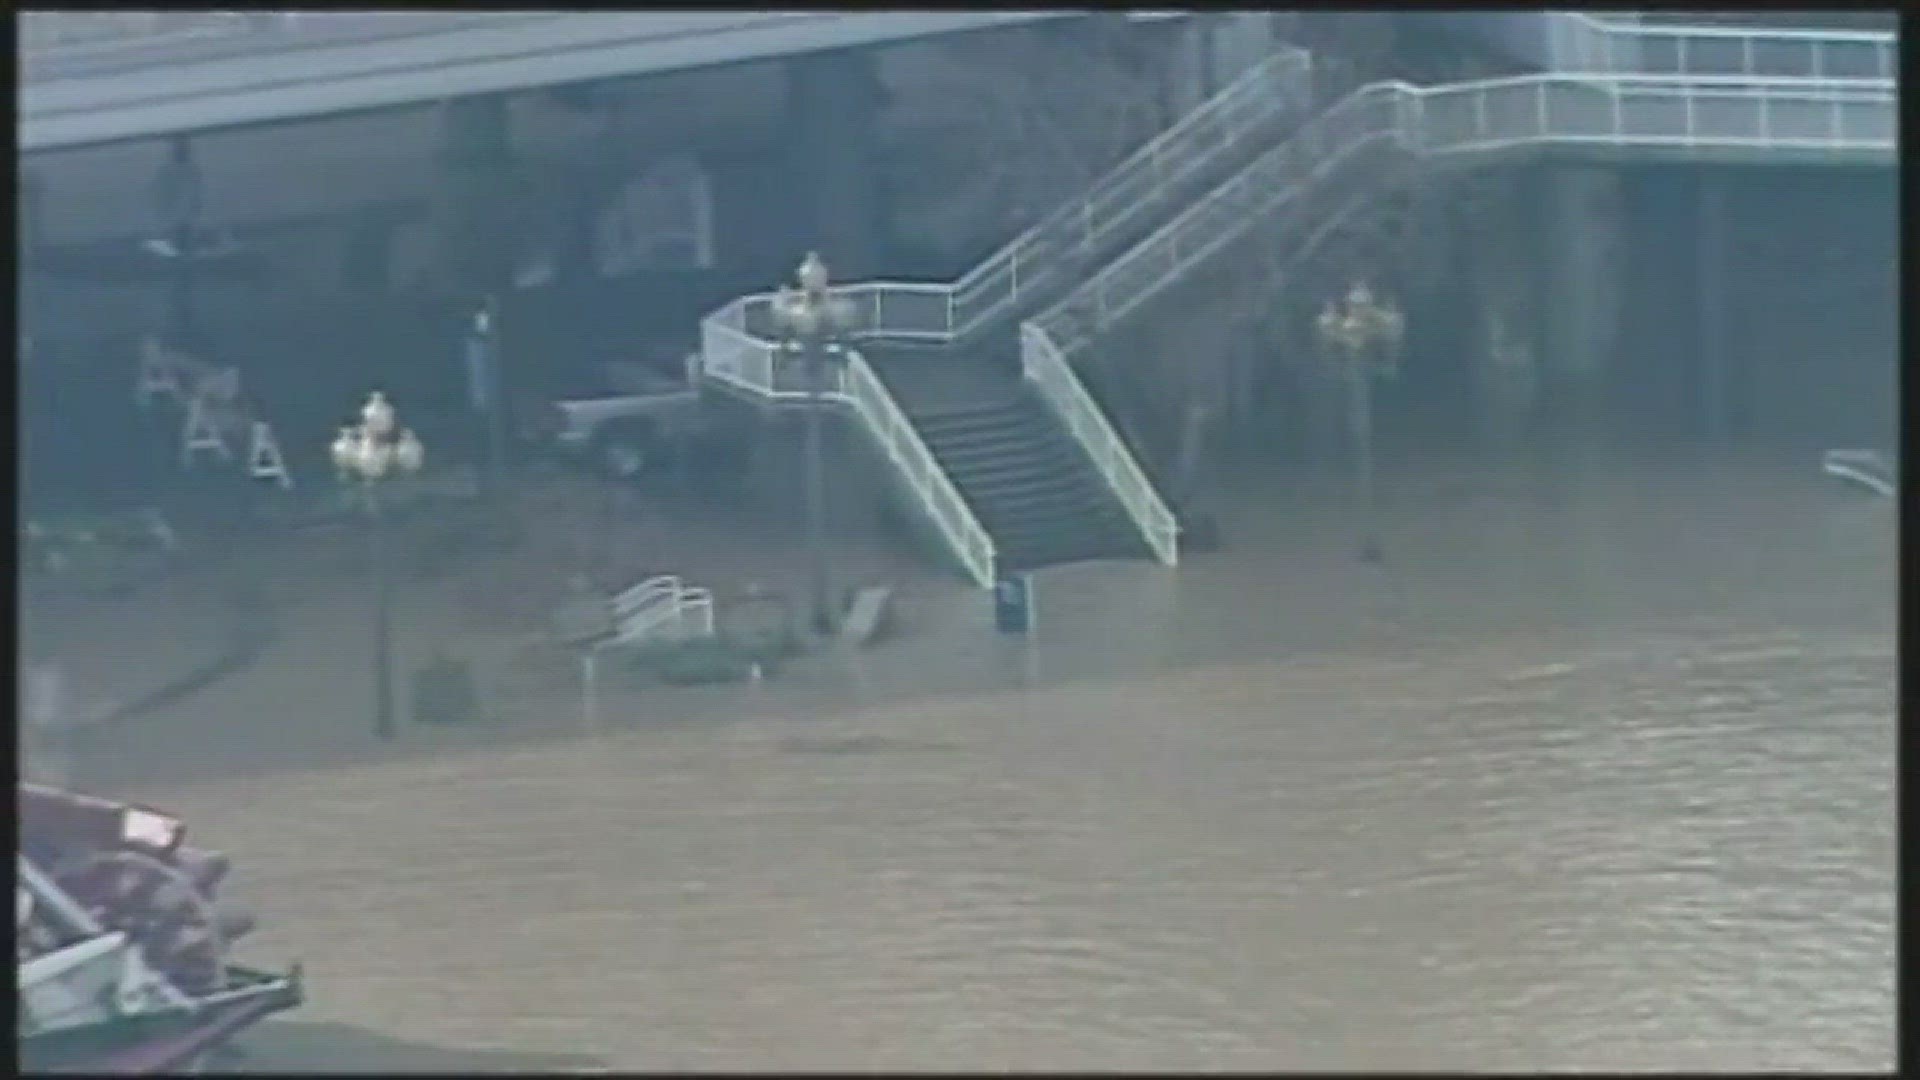 SKY11 was over flooding in the areas of River Road and Waterfront Park on Feb. 19.